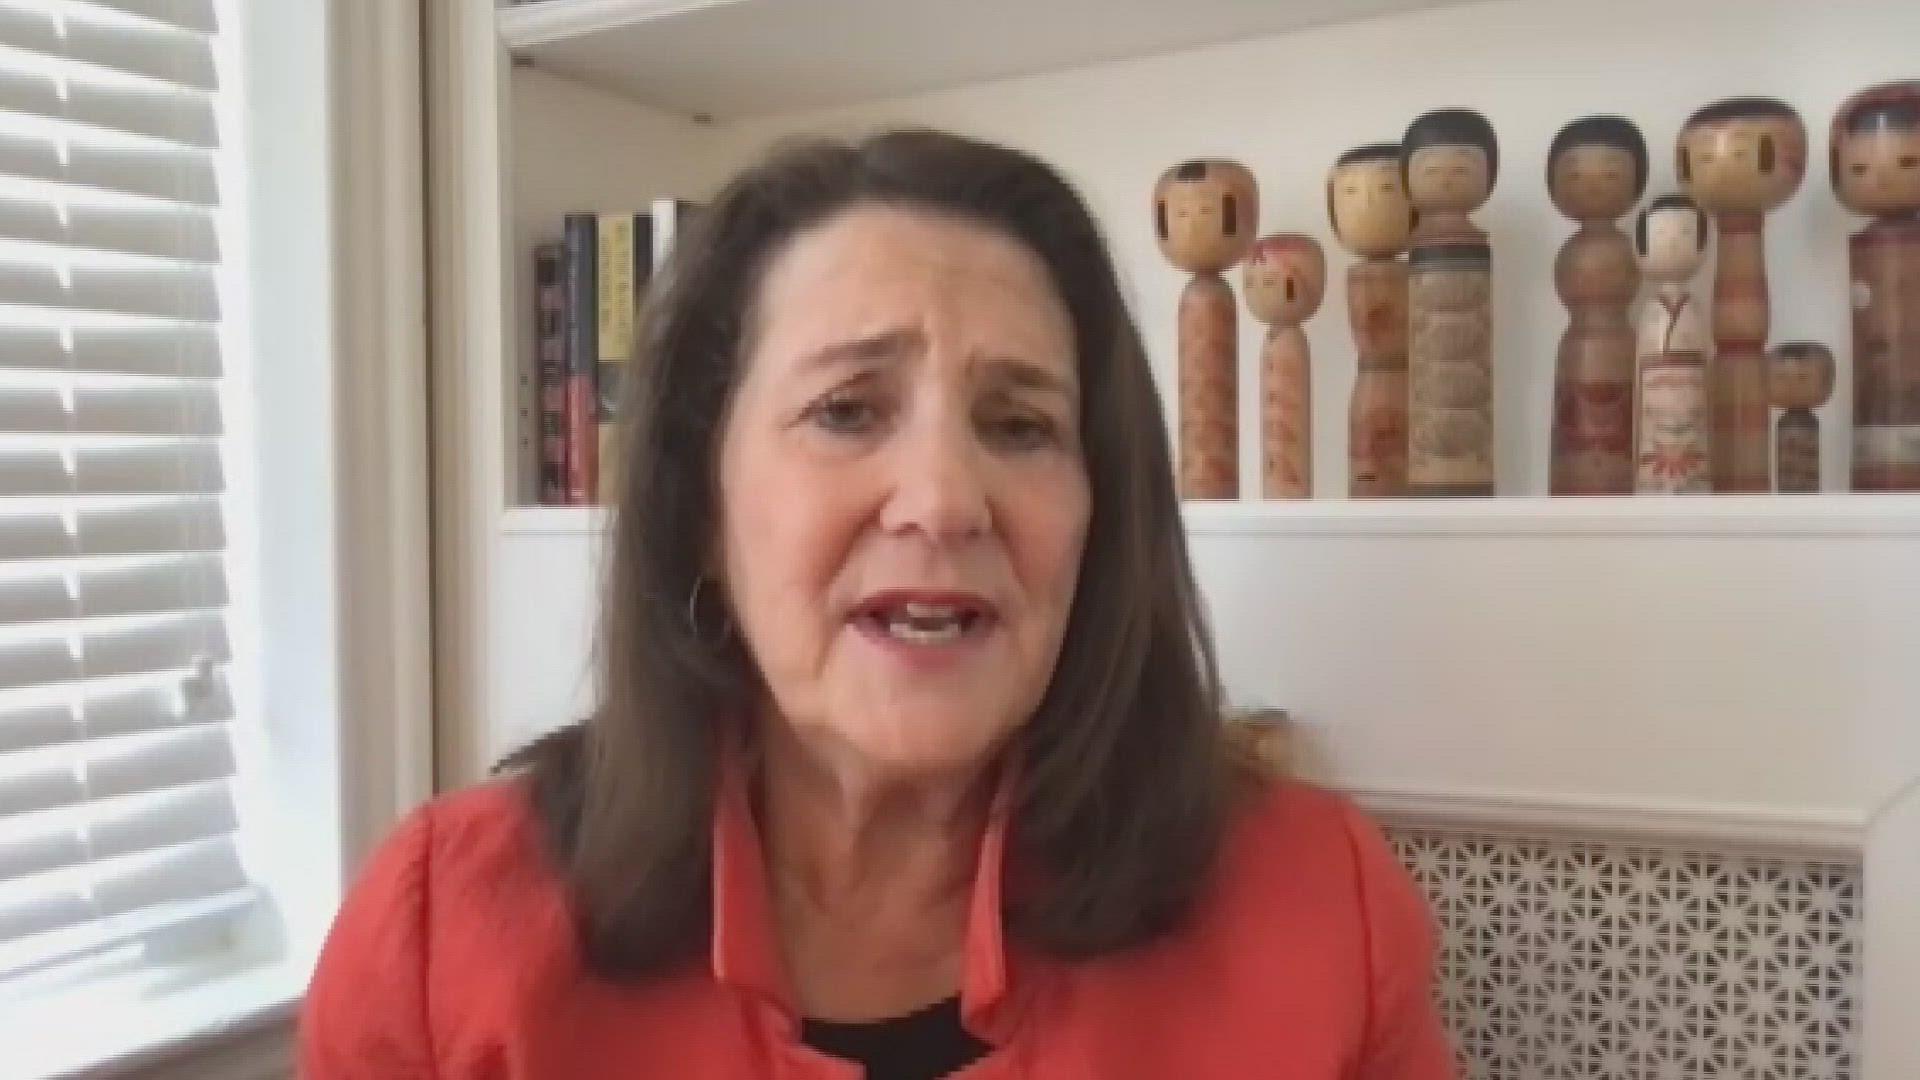 Colorado congresswoman Diane DeGette says House Democrats are "ready, willing, and able" to reach a bipartisan agreement on a new speaker after McCarthy was ousted.